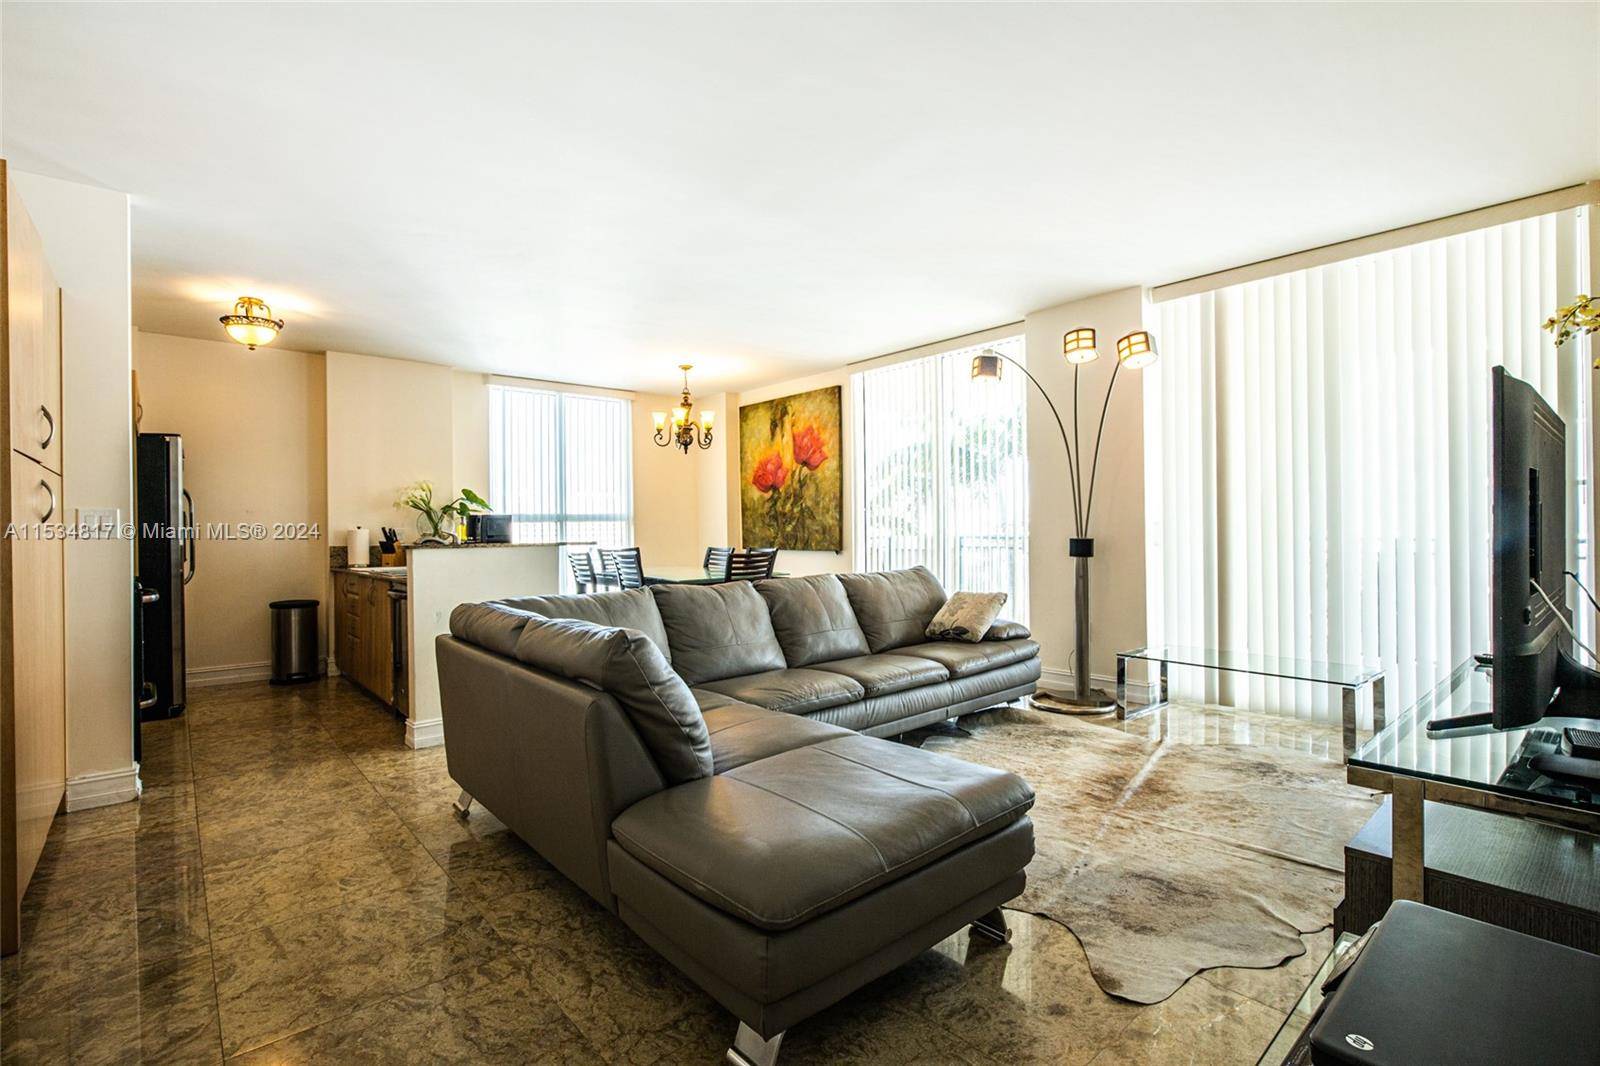 Ideal for a modern family, combination of rest on Beach and remote home work, fully furnished 3BR 2BT apartment overlooking the beautiful buildings of Ocean Acqualina Resort Residency on the ...